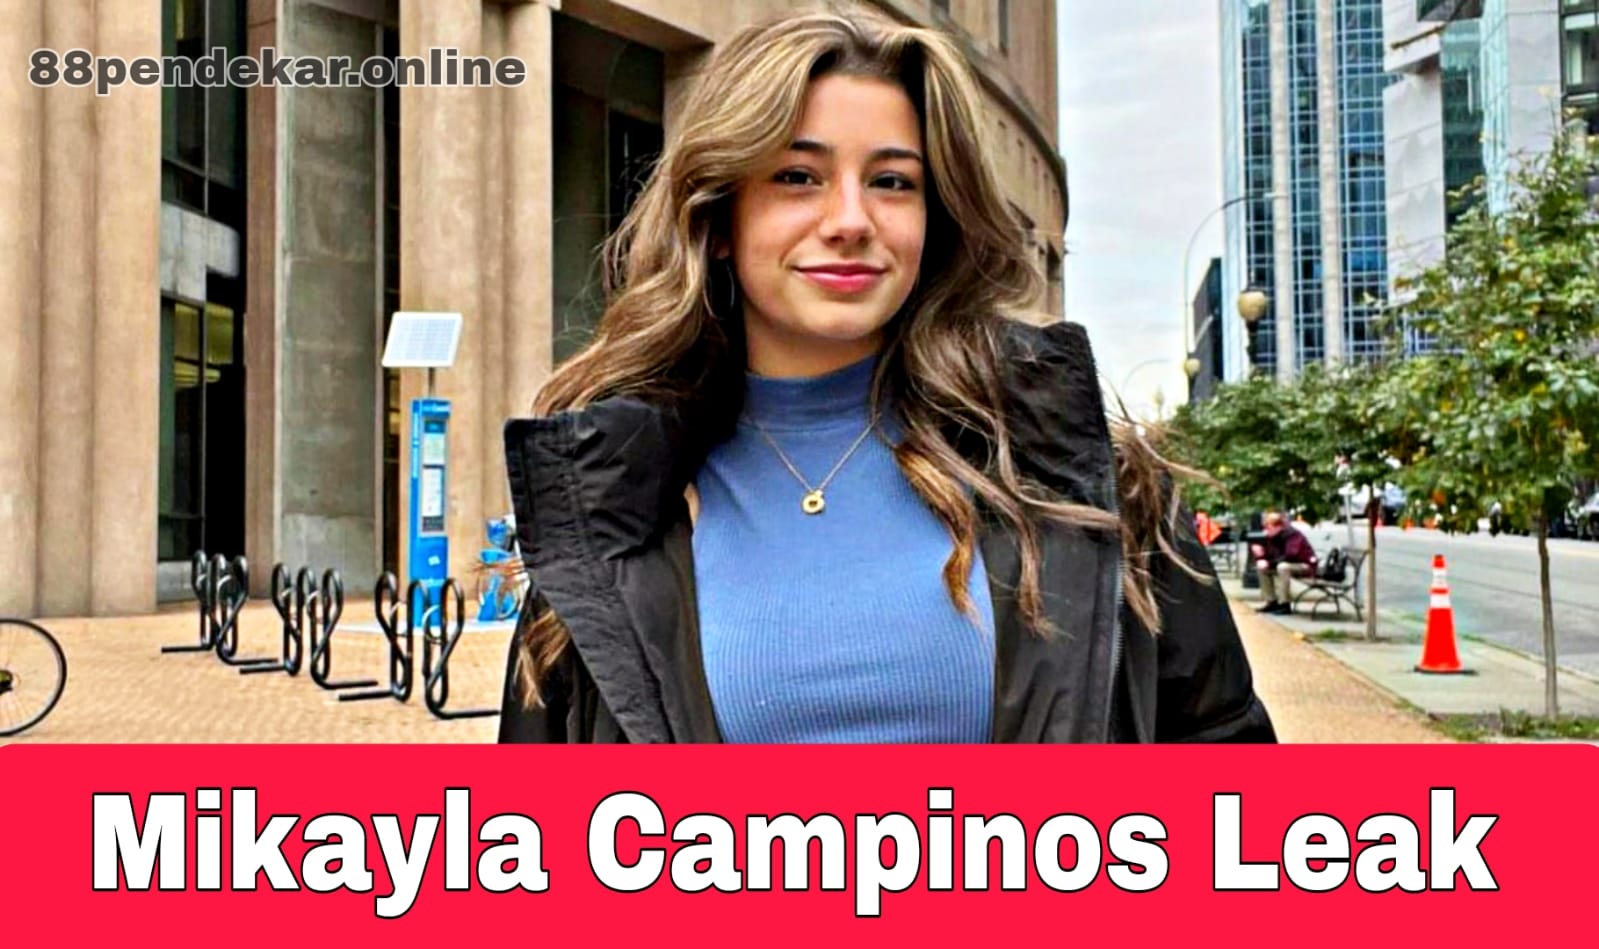 Mikayla Campinos Leak: What Best You Need to Know